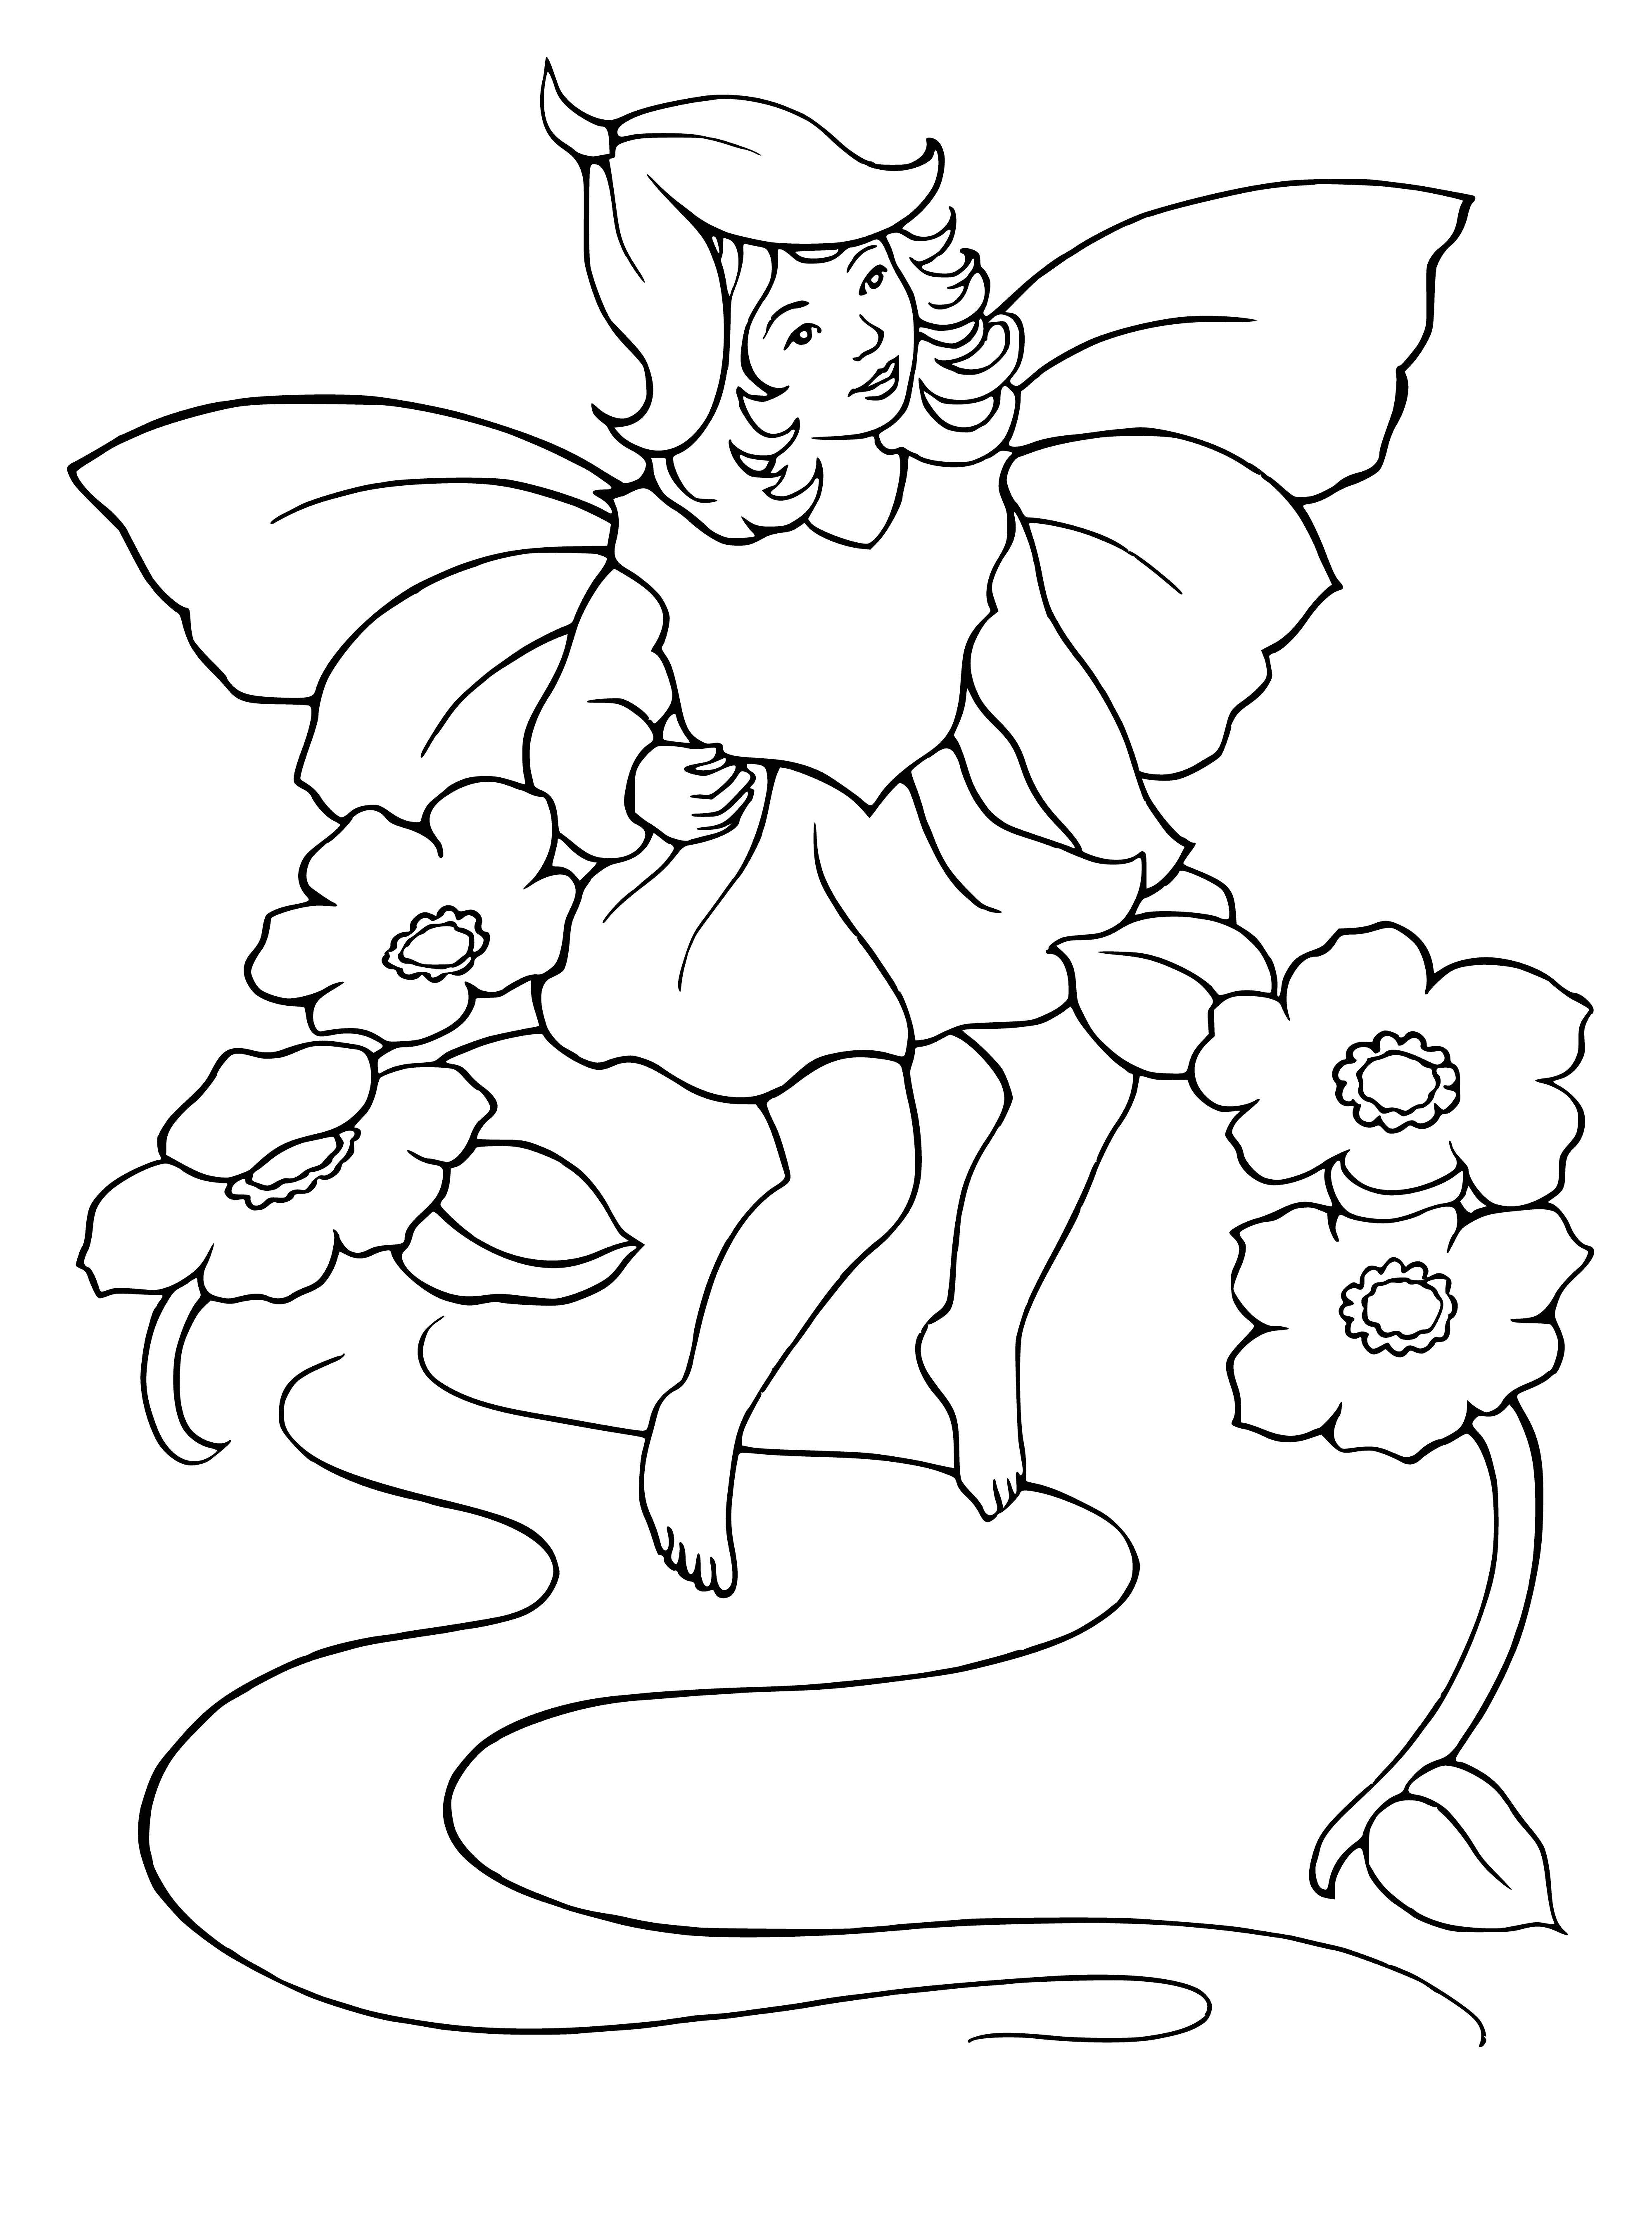 coloring page: Elves & fairies have a laugh on a mushroom & flower. They seem to enjoy each other's company. #coloringpages